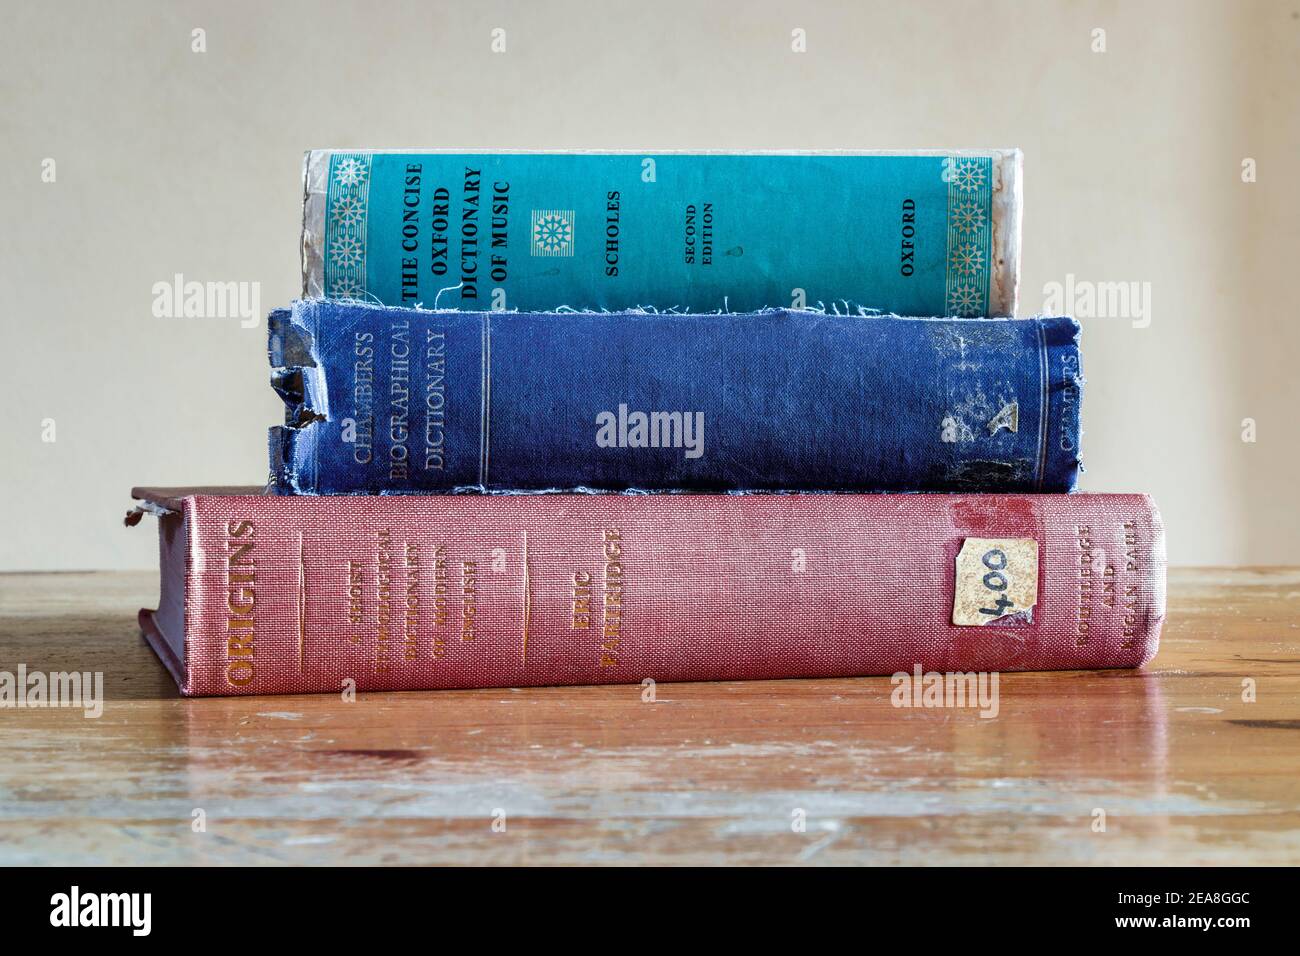 A stack of three old hardback reference books on an old wooden desk Stock Photo